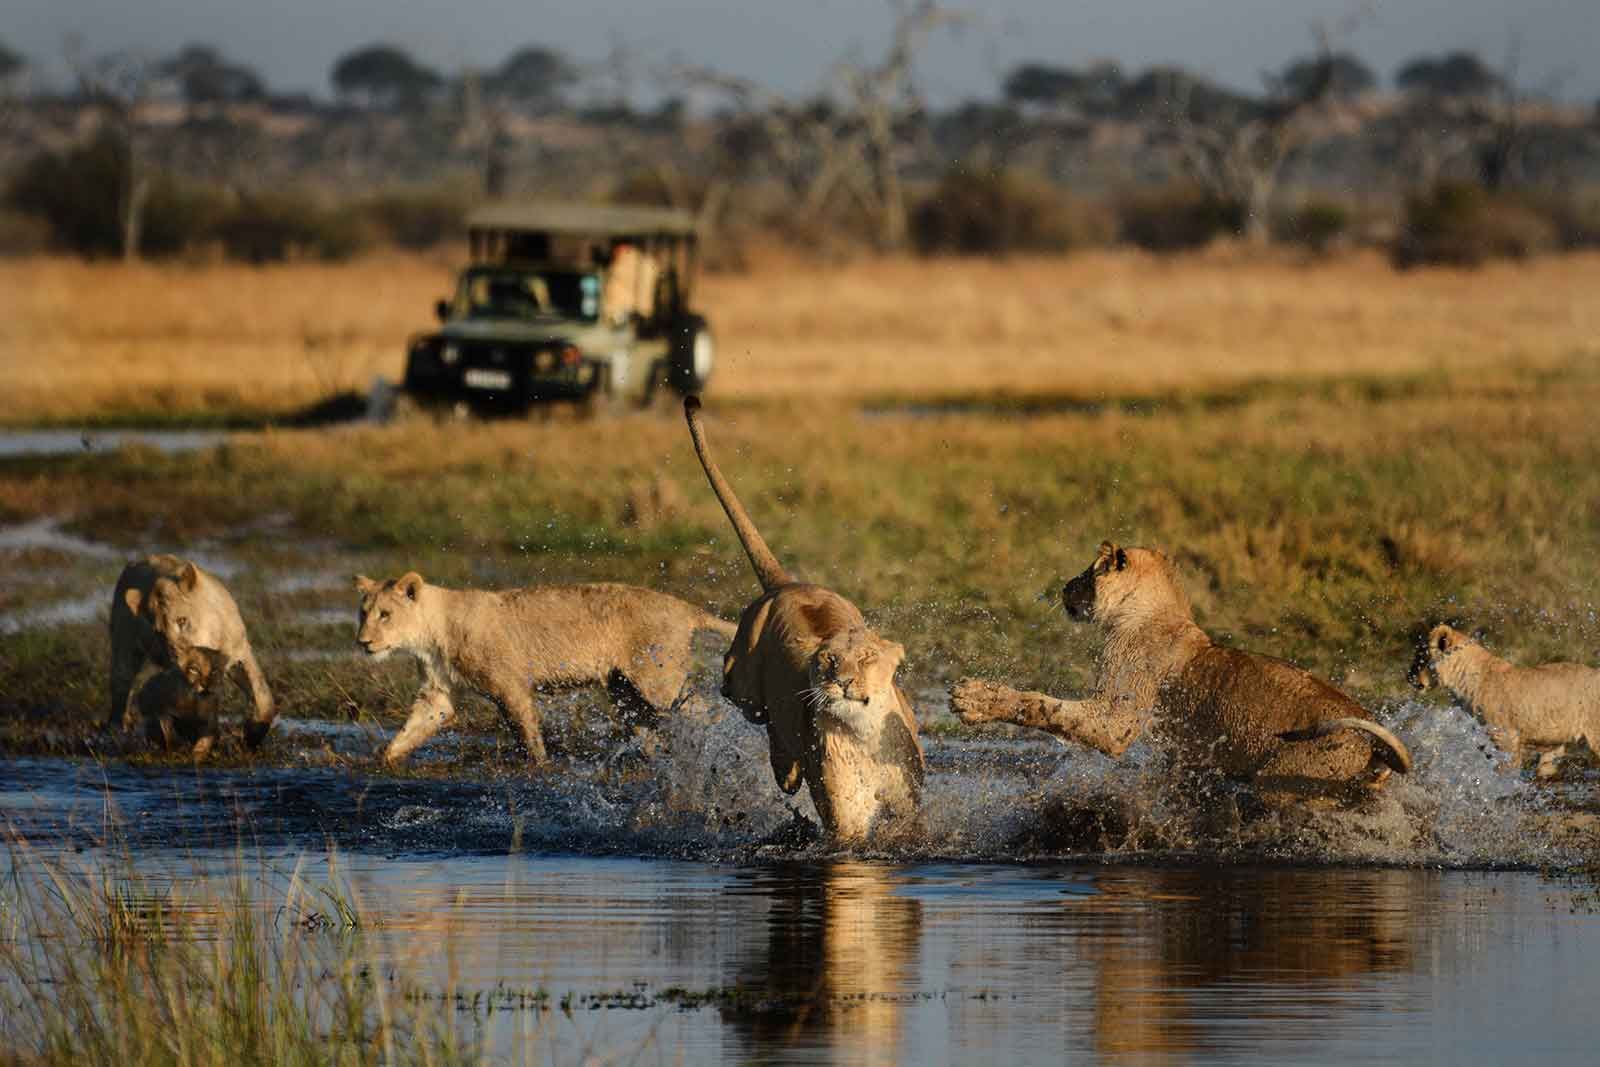 contact-camp-savuti-to-experience-this-spectacular-sighting-in-the-bushveld